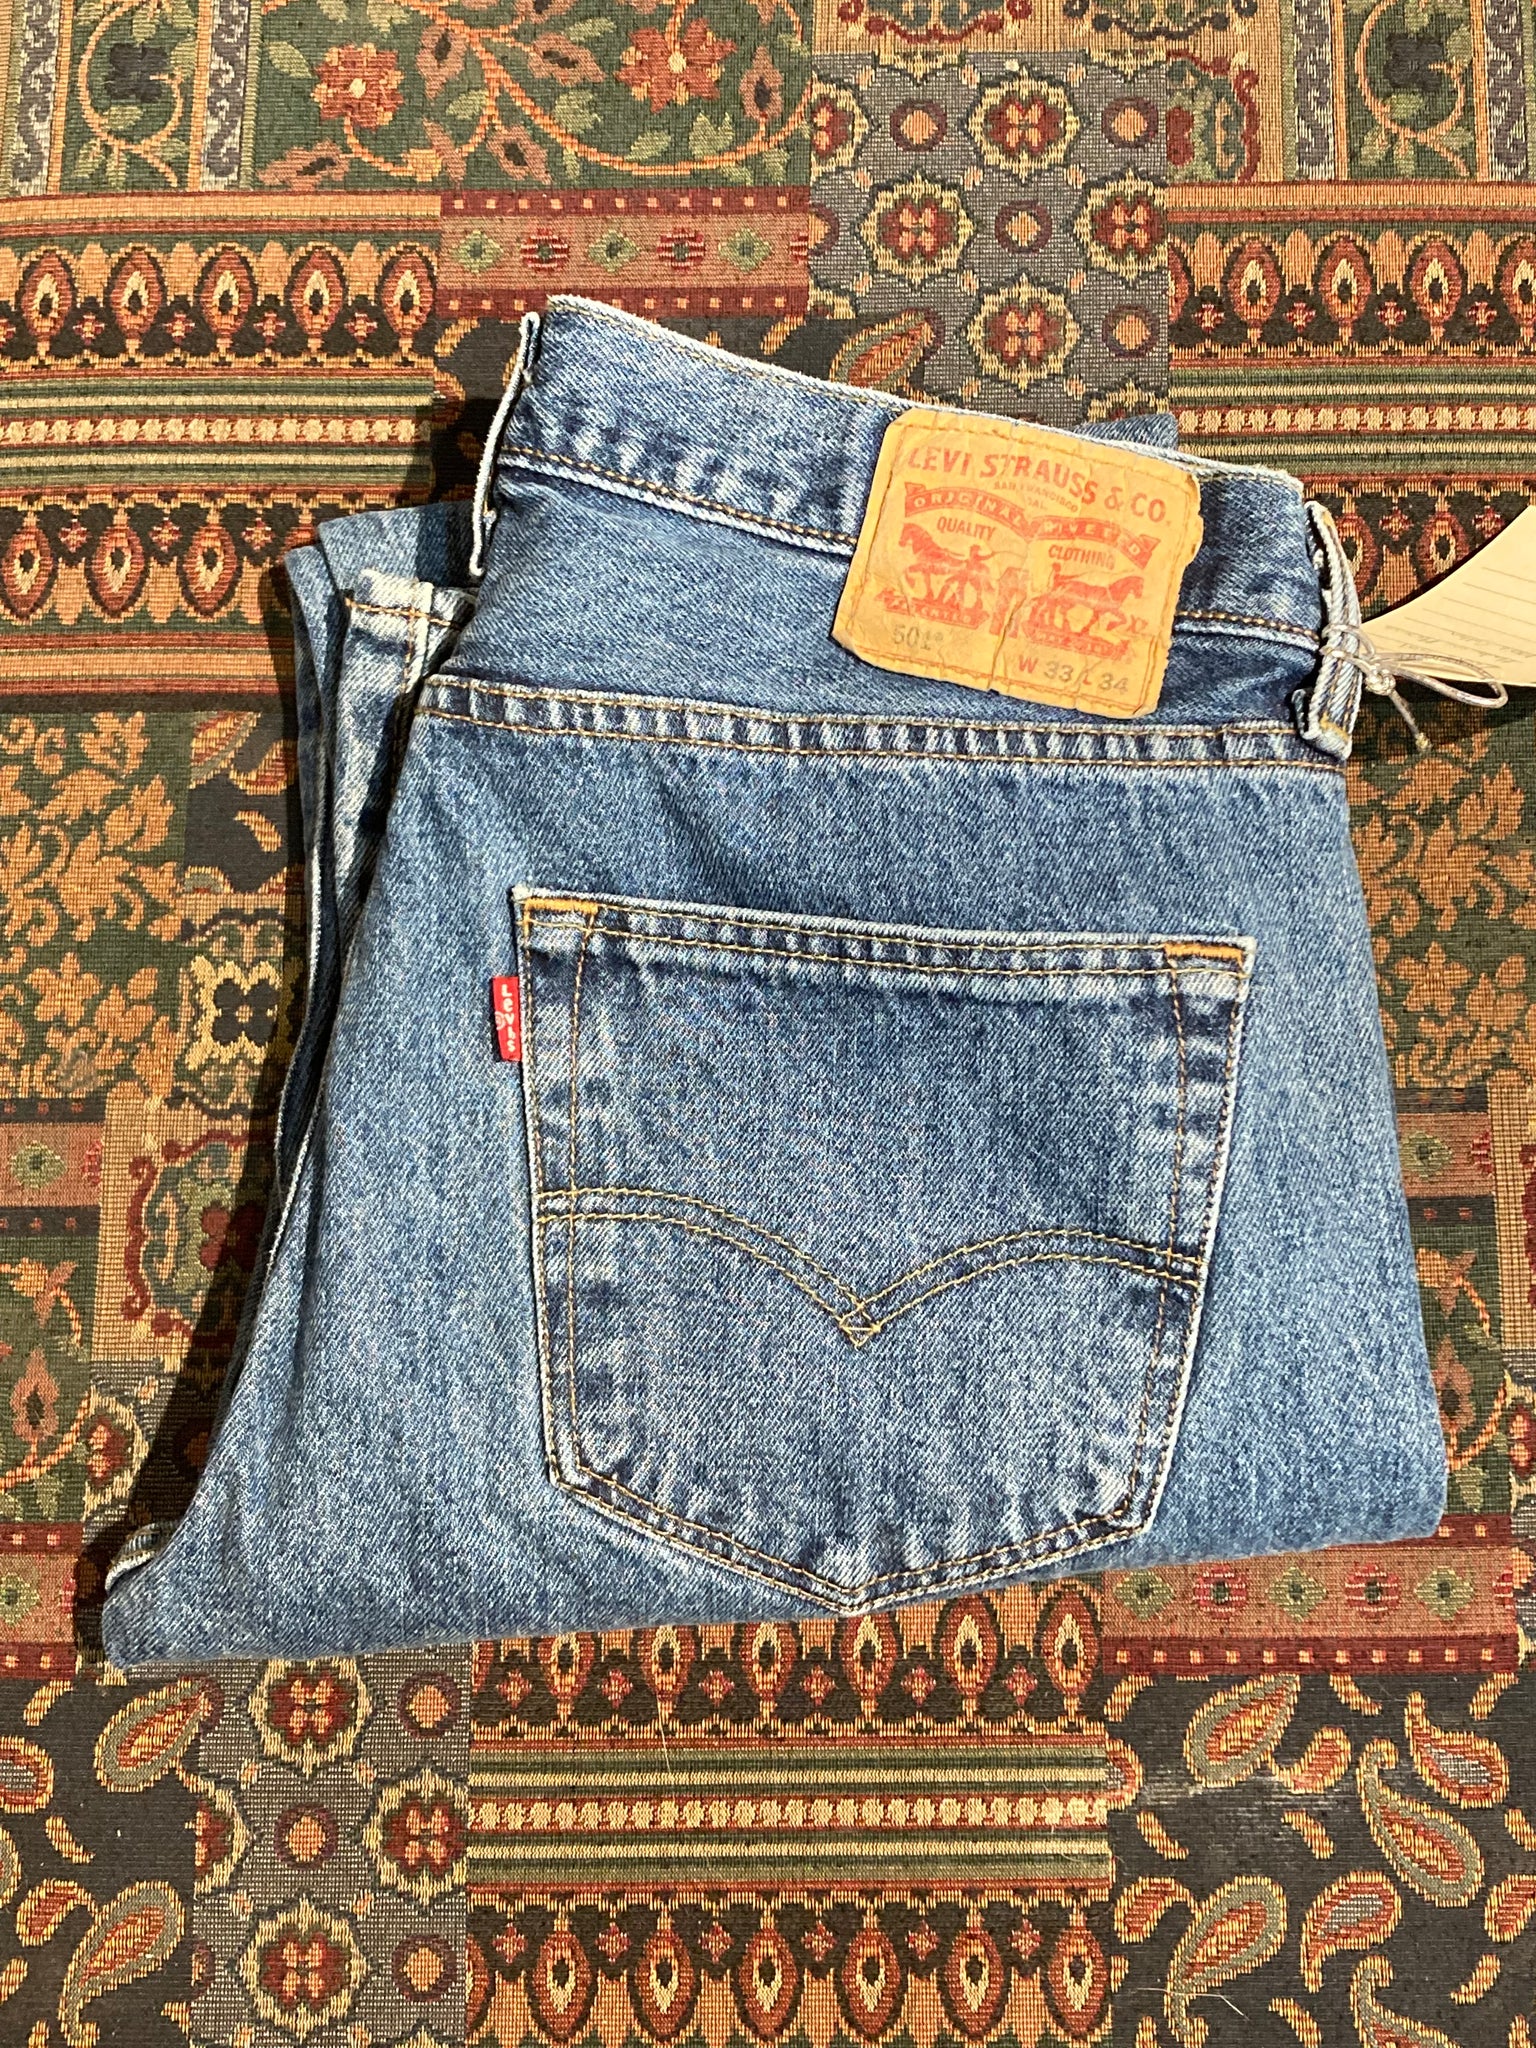 Levi's 501 Red Tab Denim Jeans - 33”x34”, Made in Mexico – KingsPIER vintage